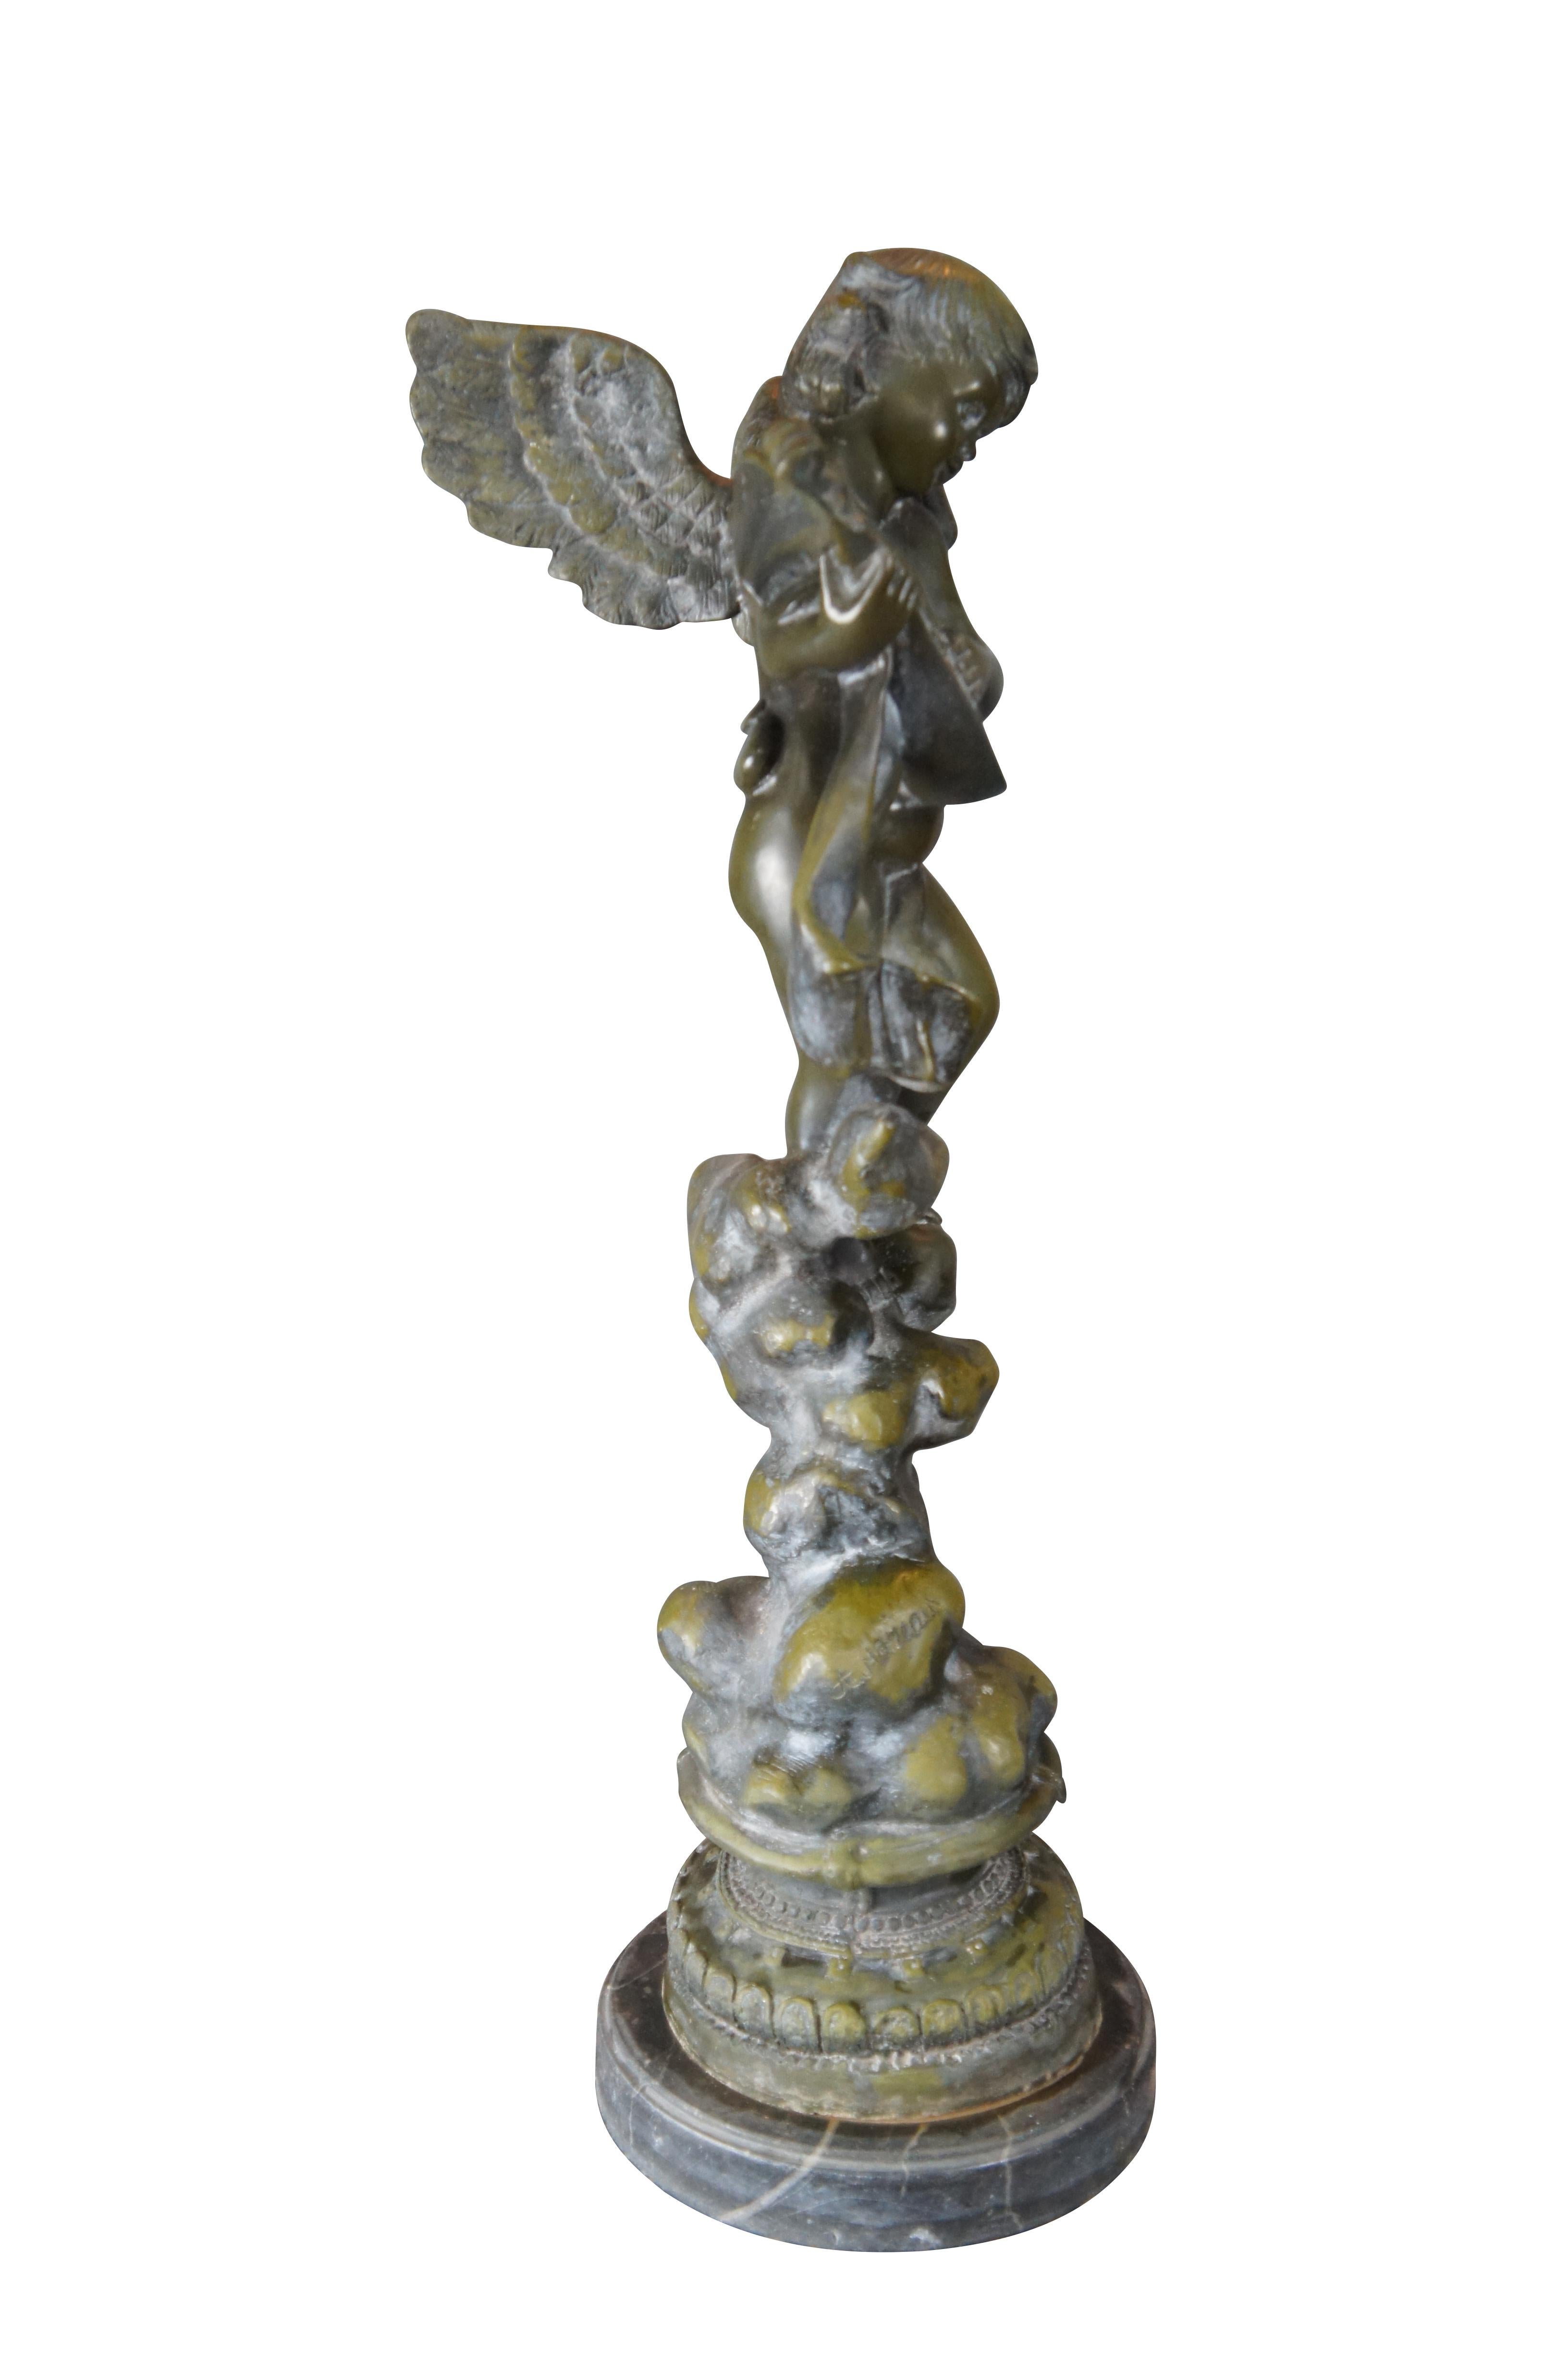 Large verdigris bronze of an angel playing a mandolin over rocks. After A. Moreau, circa mid 20th century. The bronze is mounted to marble plinth.

Dimensions:
25.5